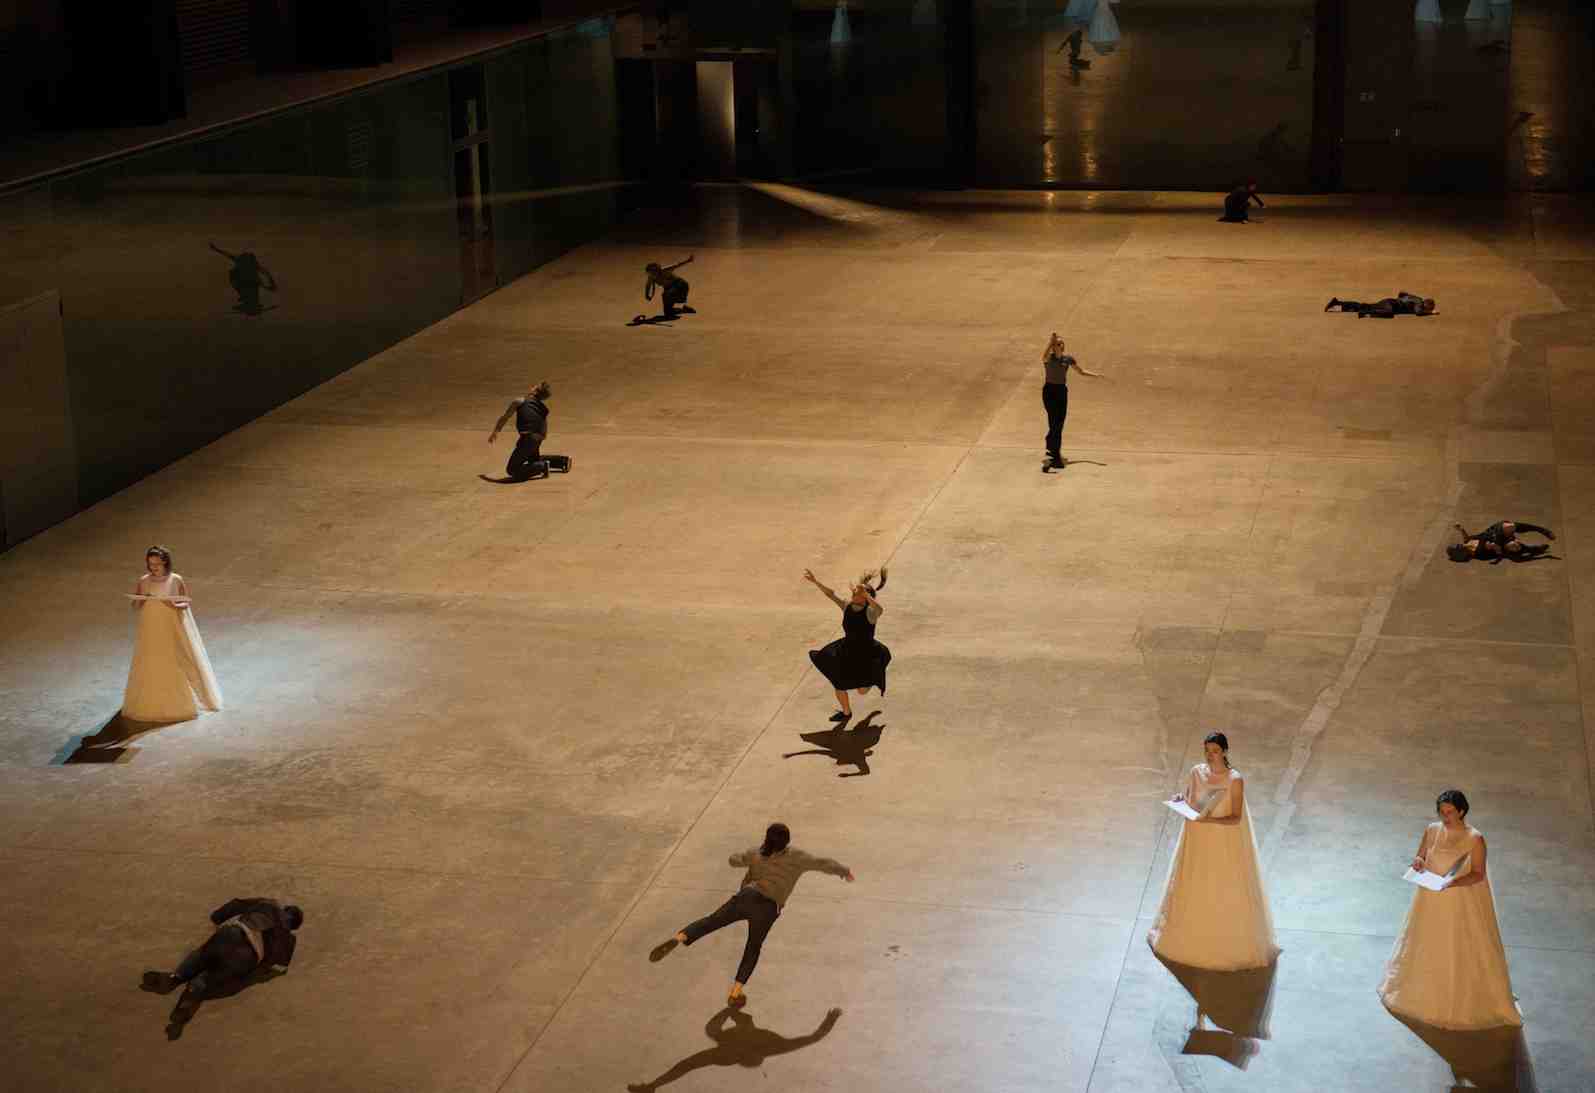 Image of several people in a turbine hall spread out in different positions and heights. 3 people are dressed in white ball gowns holding an opened book.